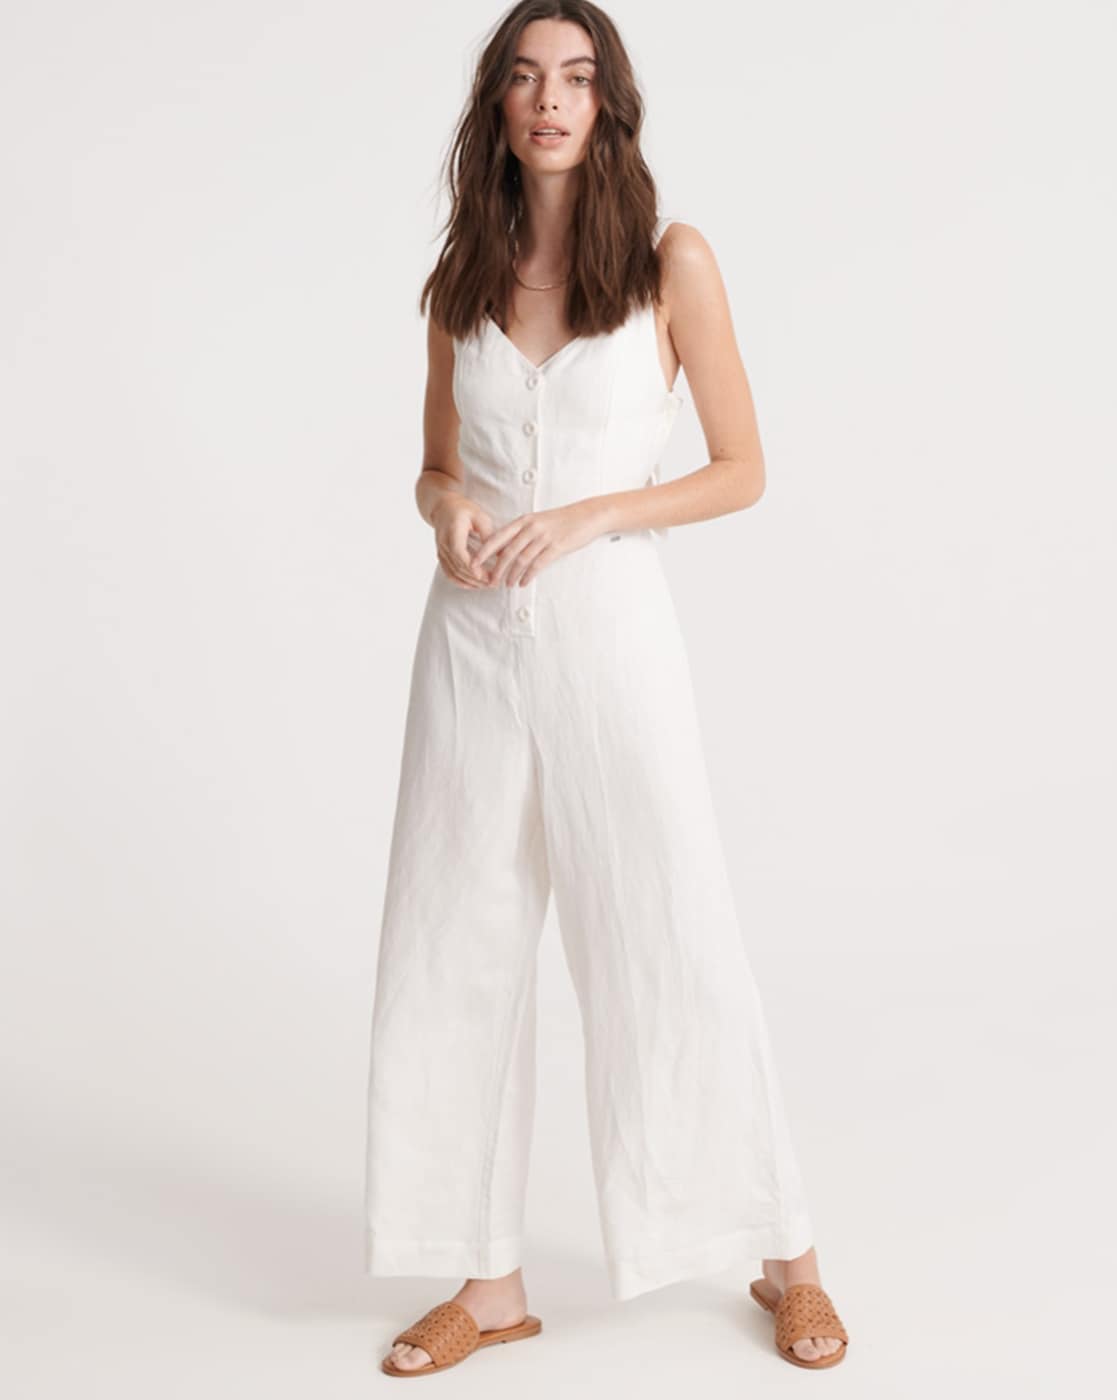 Buy Jumpsuits For Beach Women Formal On Sale online | Lazada.com.ph